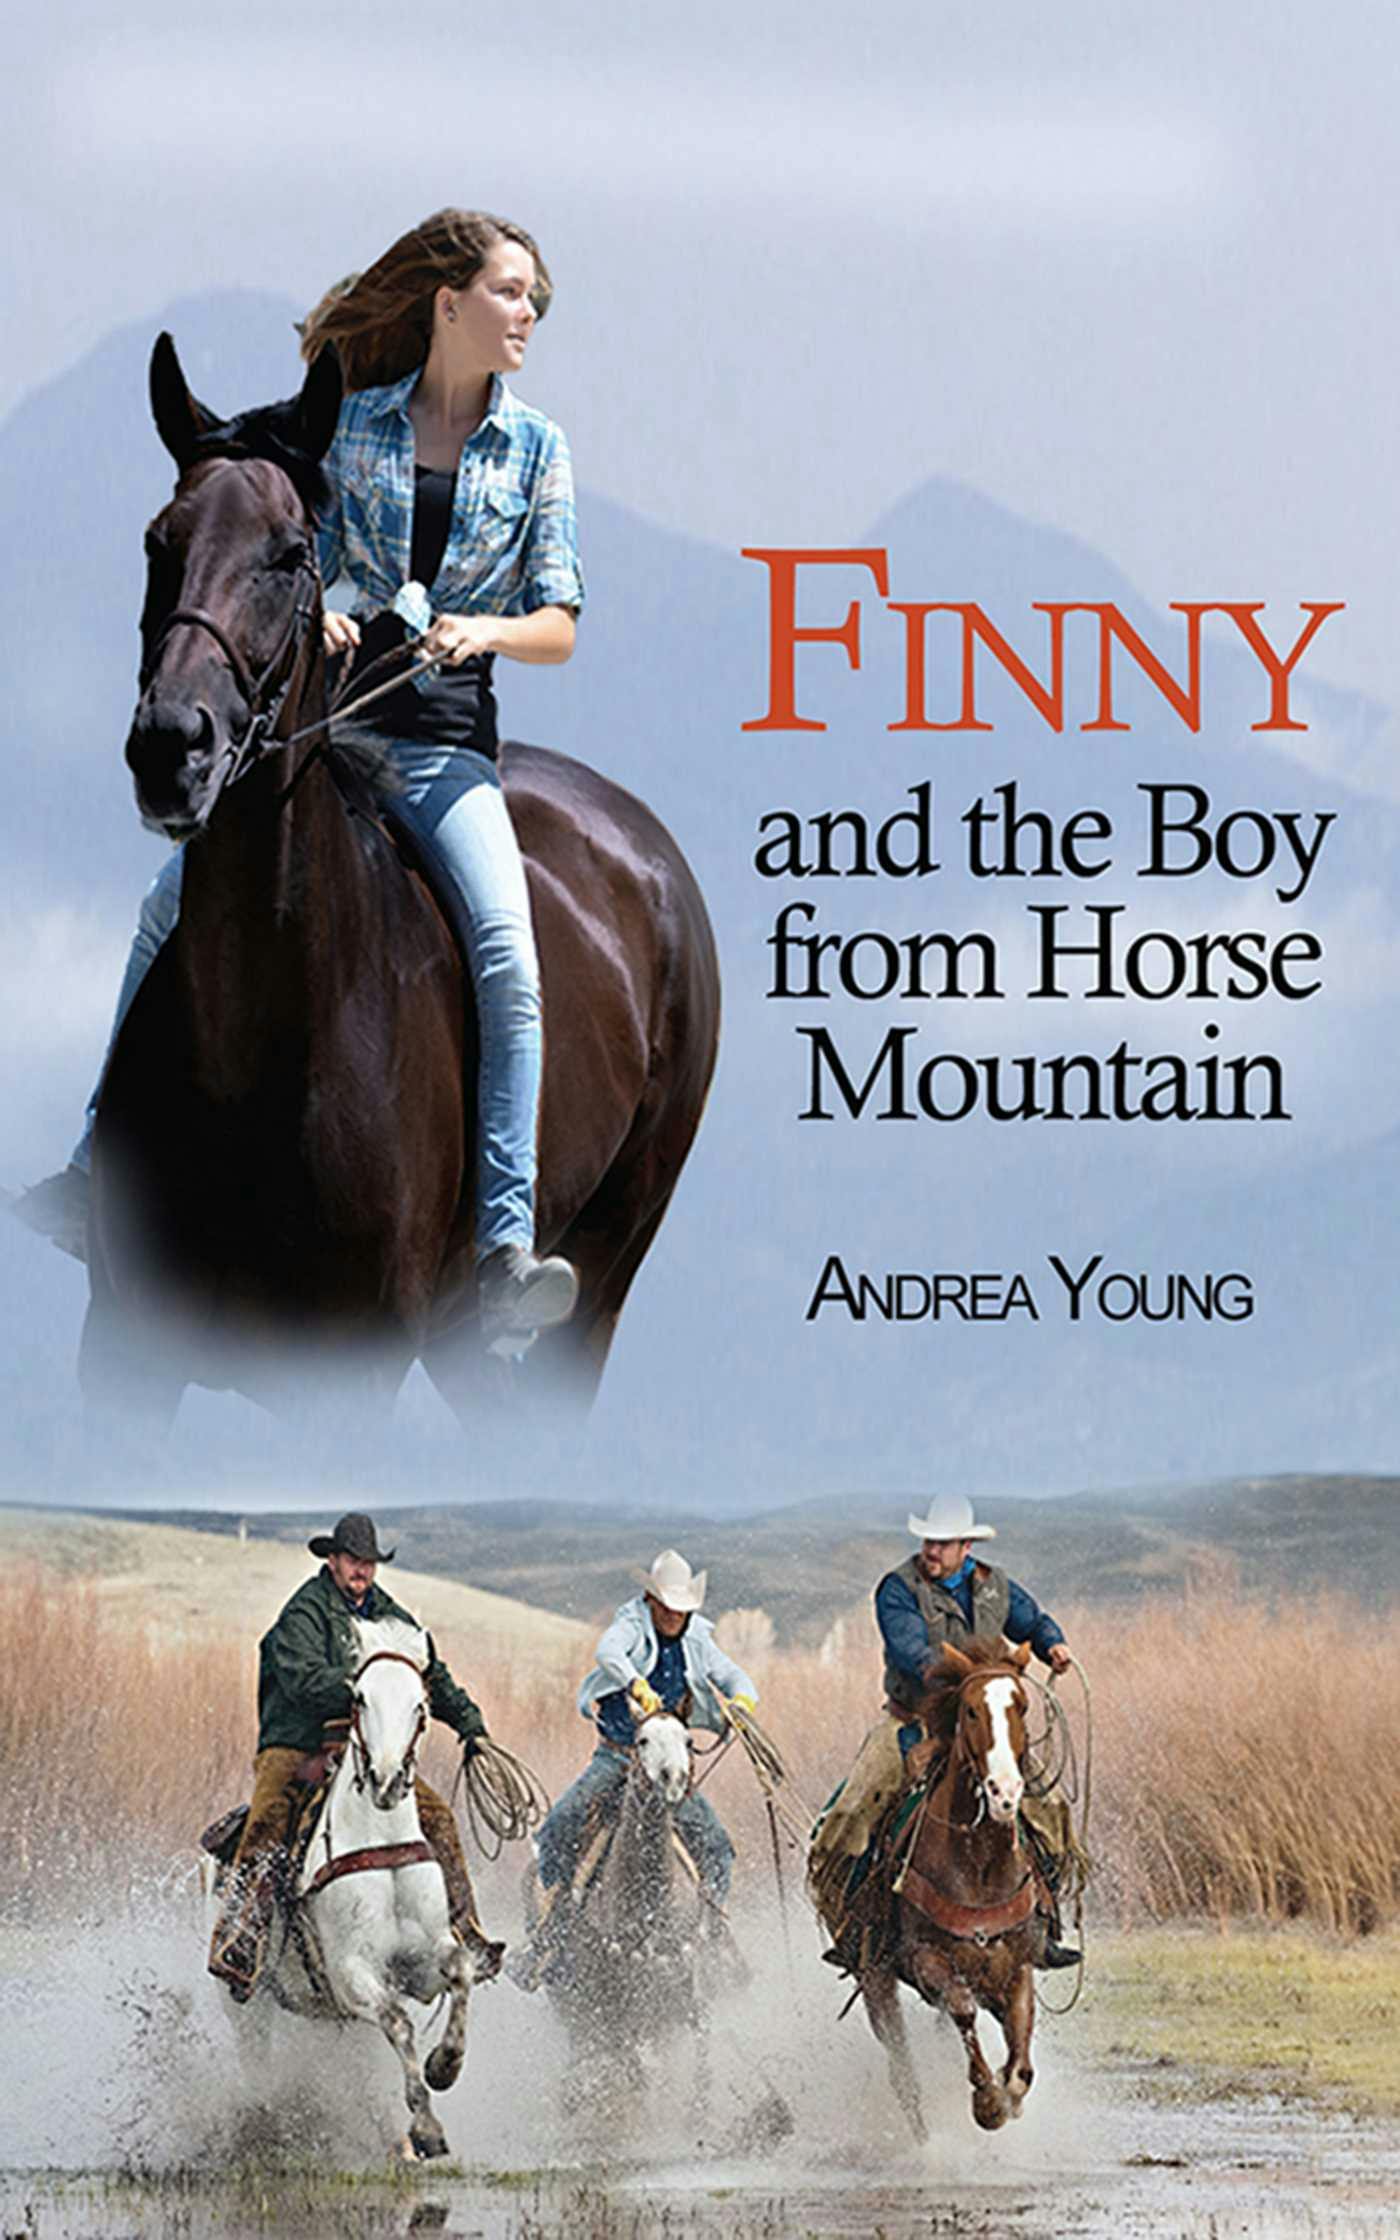 Finny and the Boy from Horse Mountain - Andrea Young